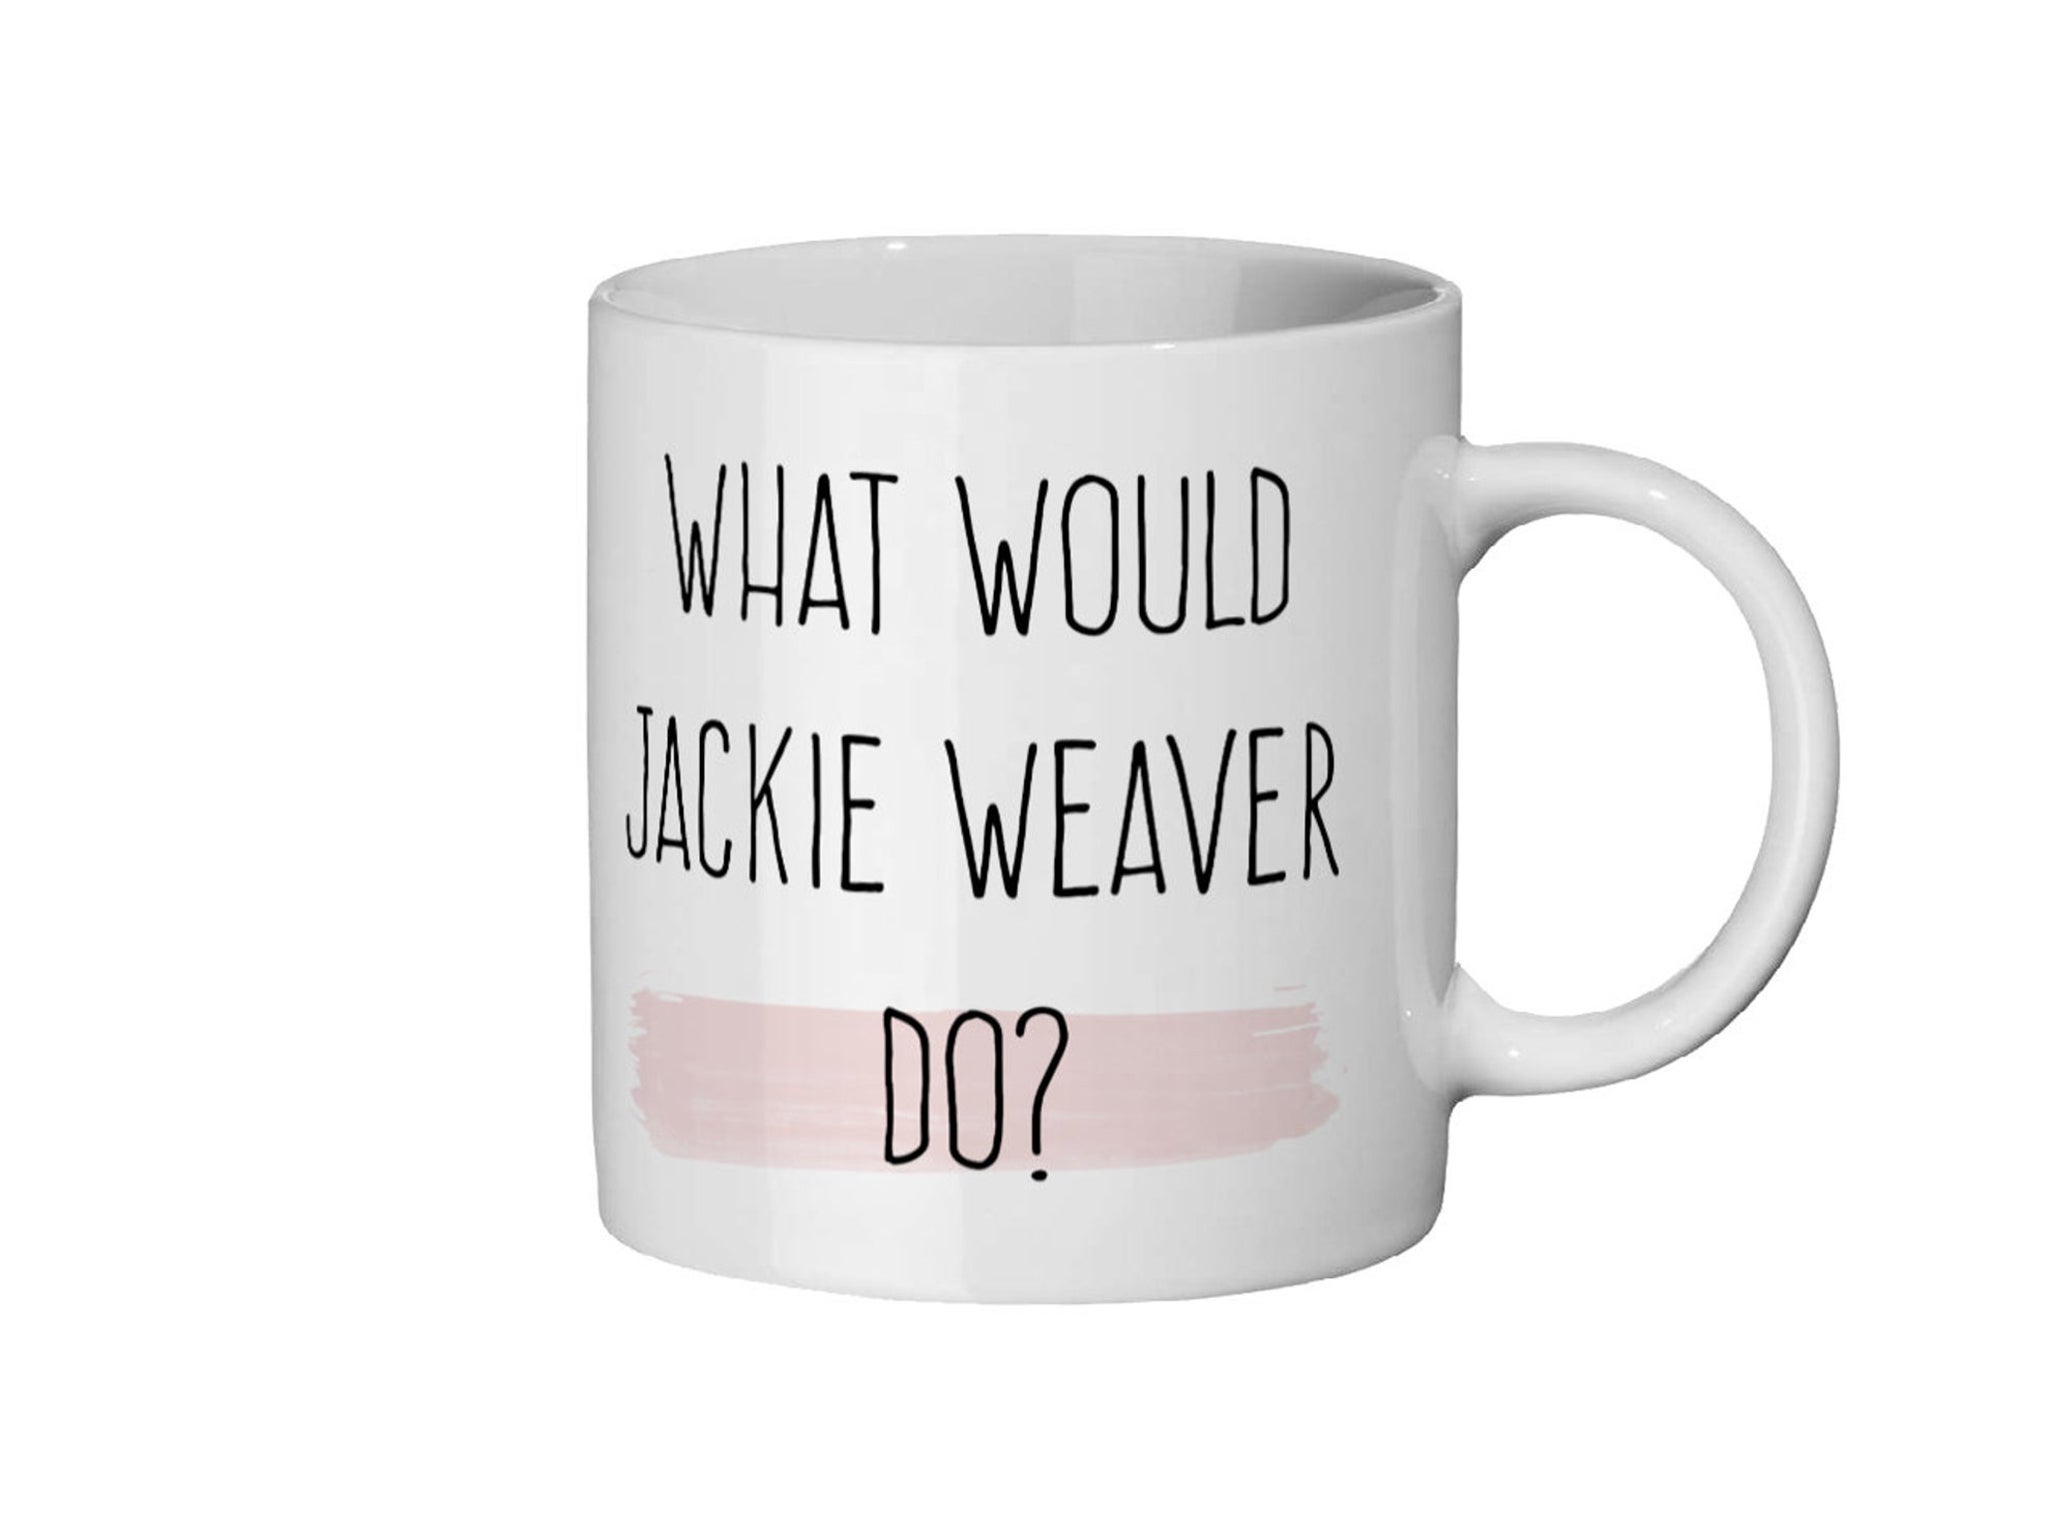 what-would-jackie-weaver-do-mug-indybest-merch.jpg